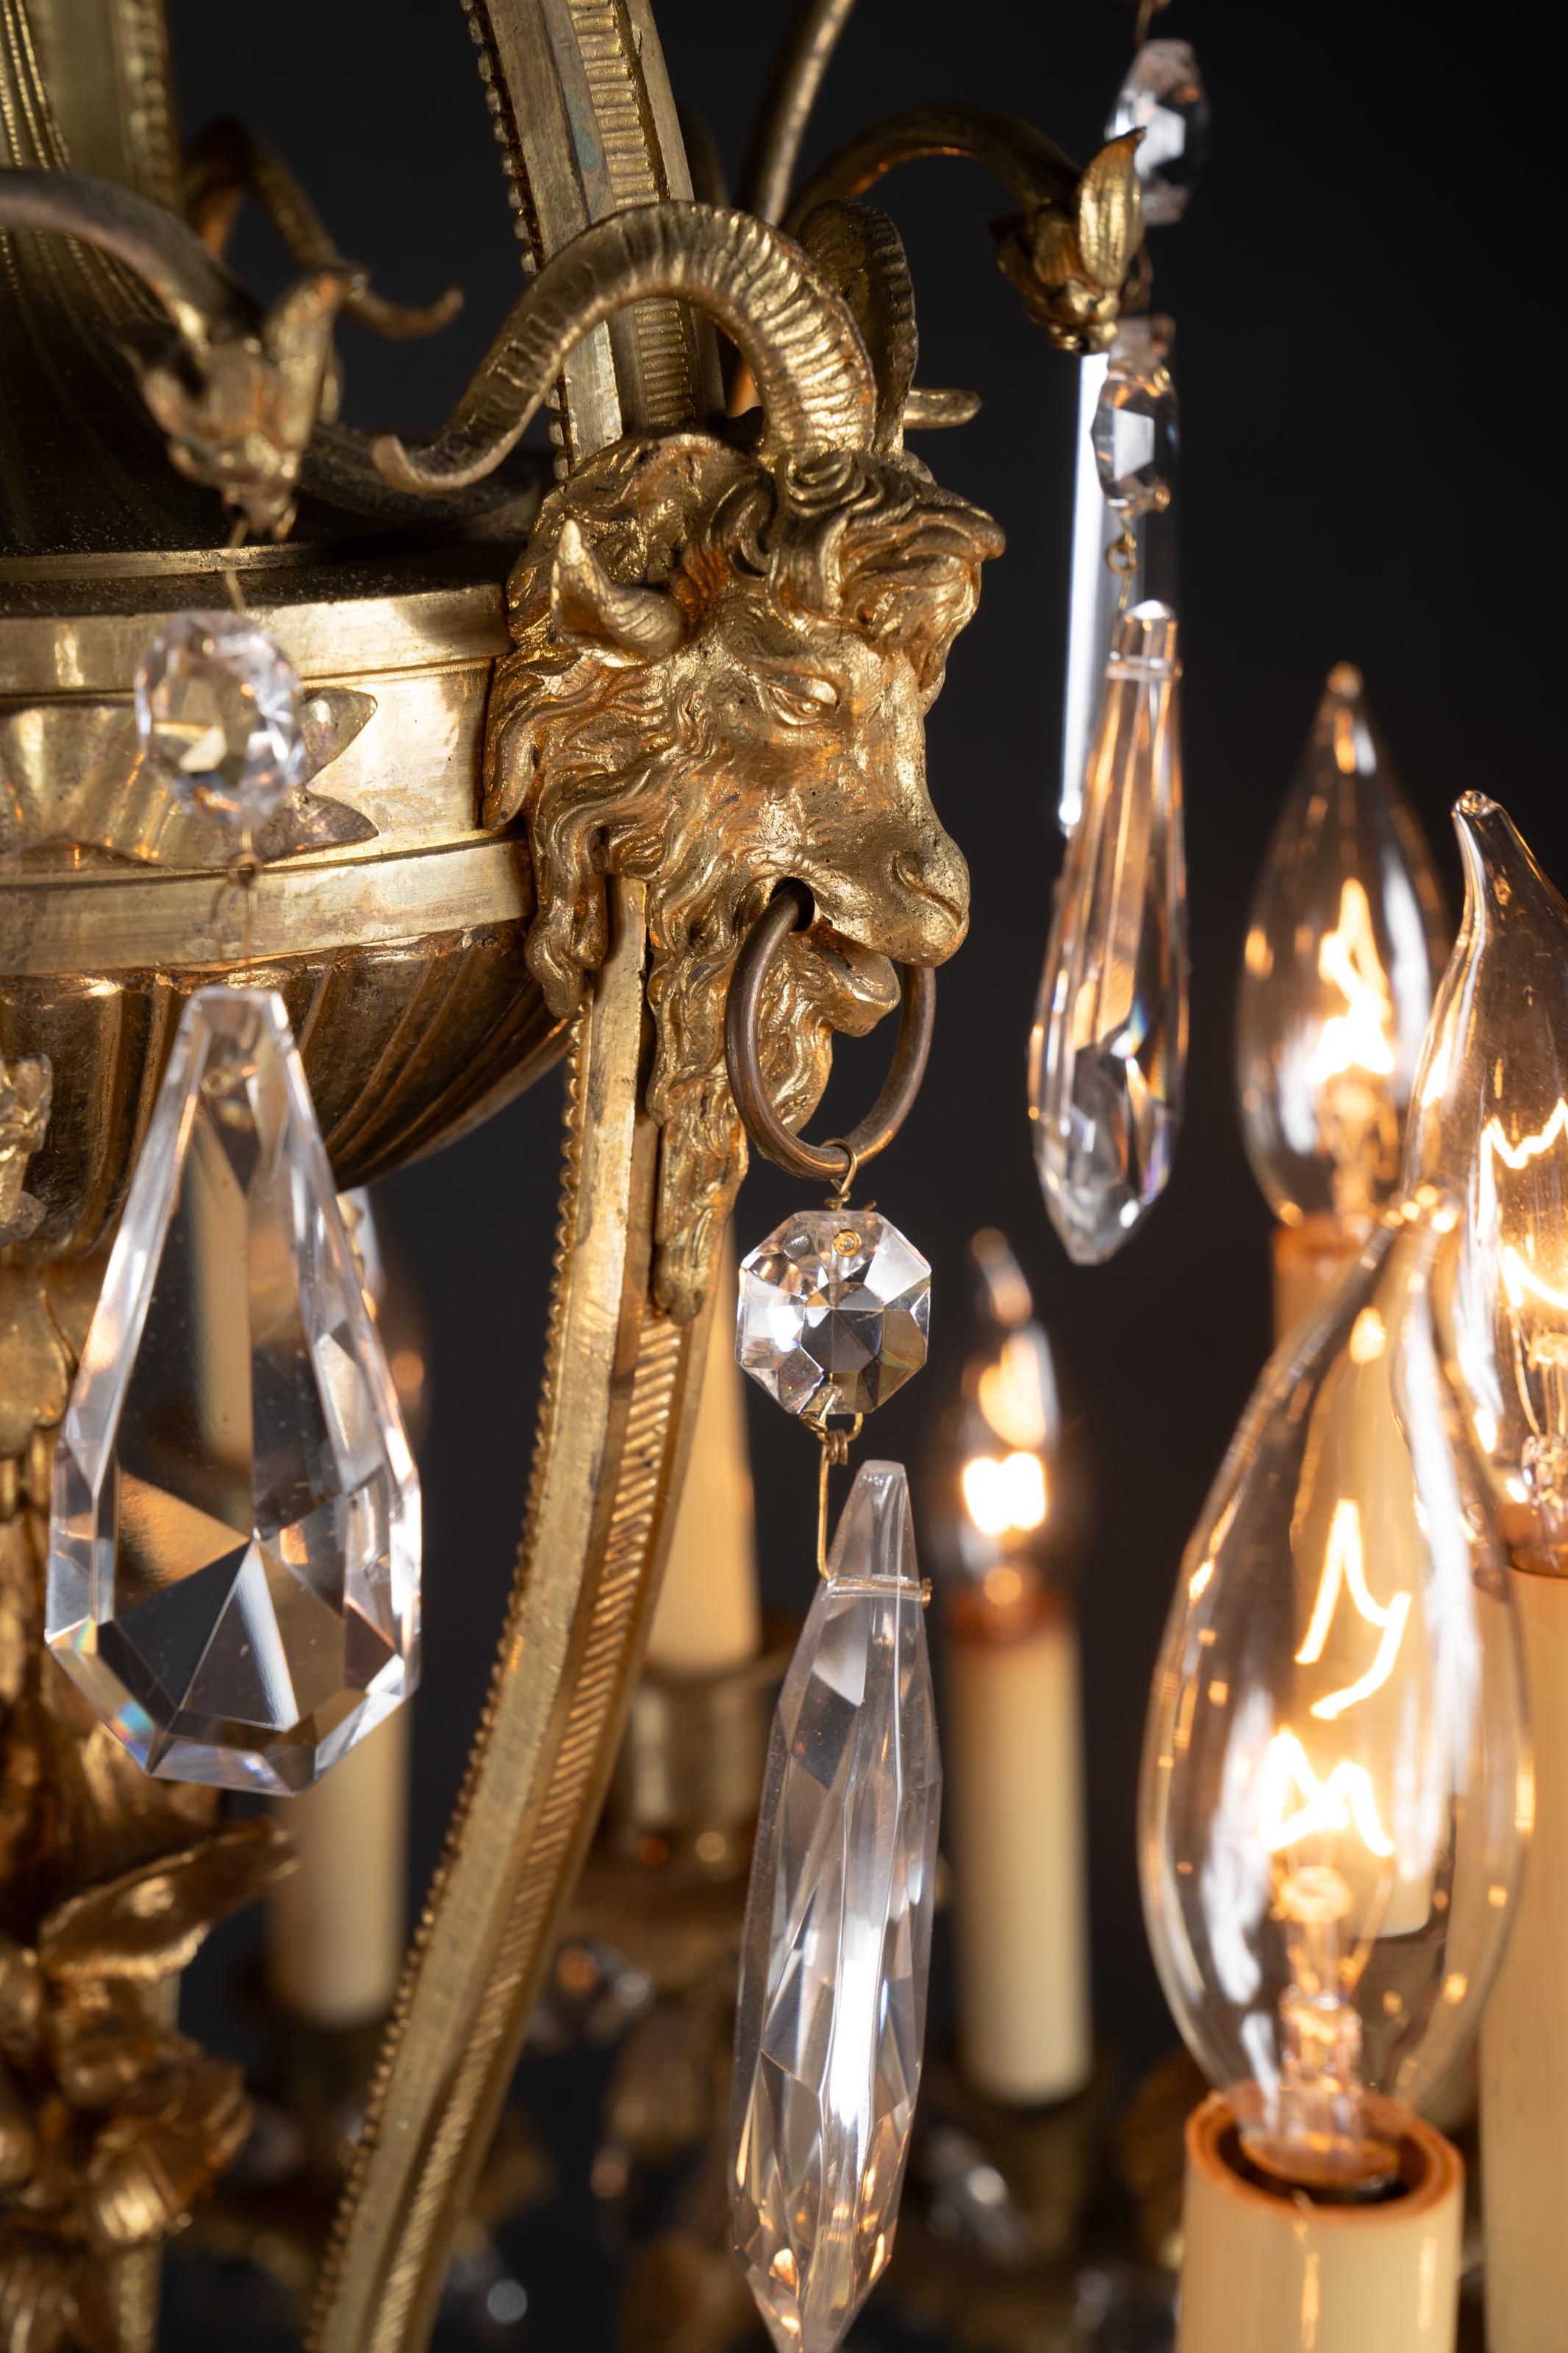 This majestic Napoleon III finely chiseled ormolu chandelier  is exquisite. The French antique piece dates back to the 19th century, and features a plethora of magnificent details.  Beginning at the top, we see a crown sporting acanthus leaves on